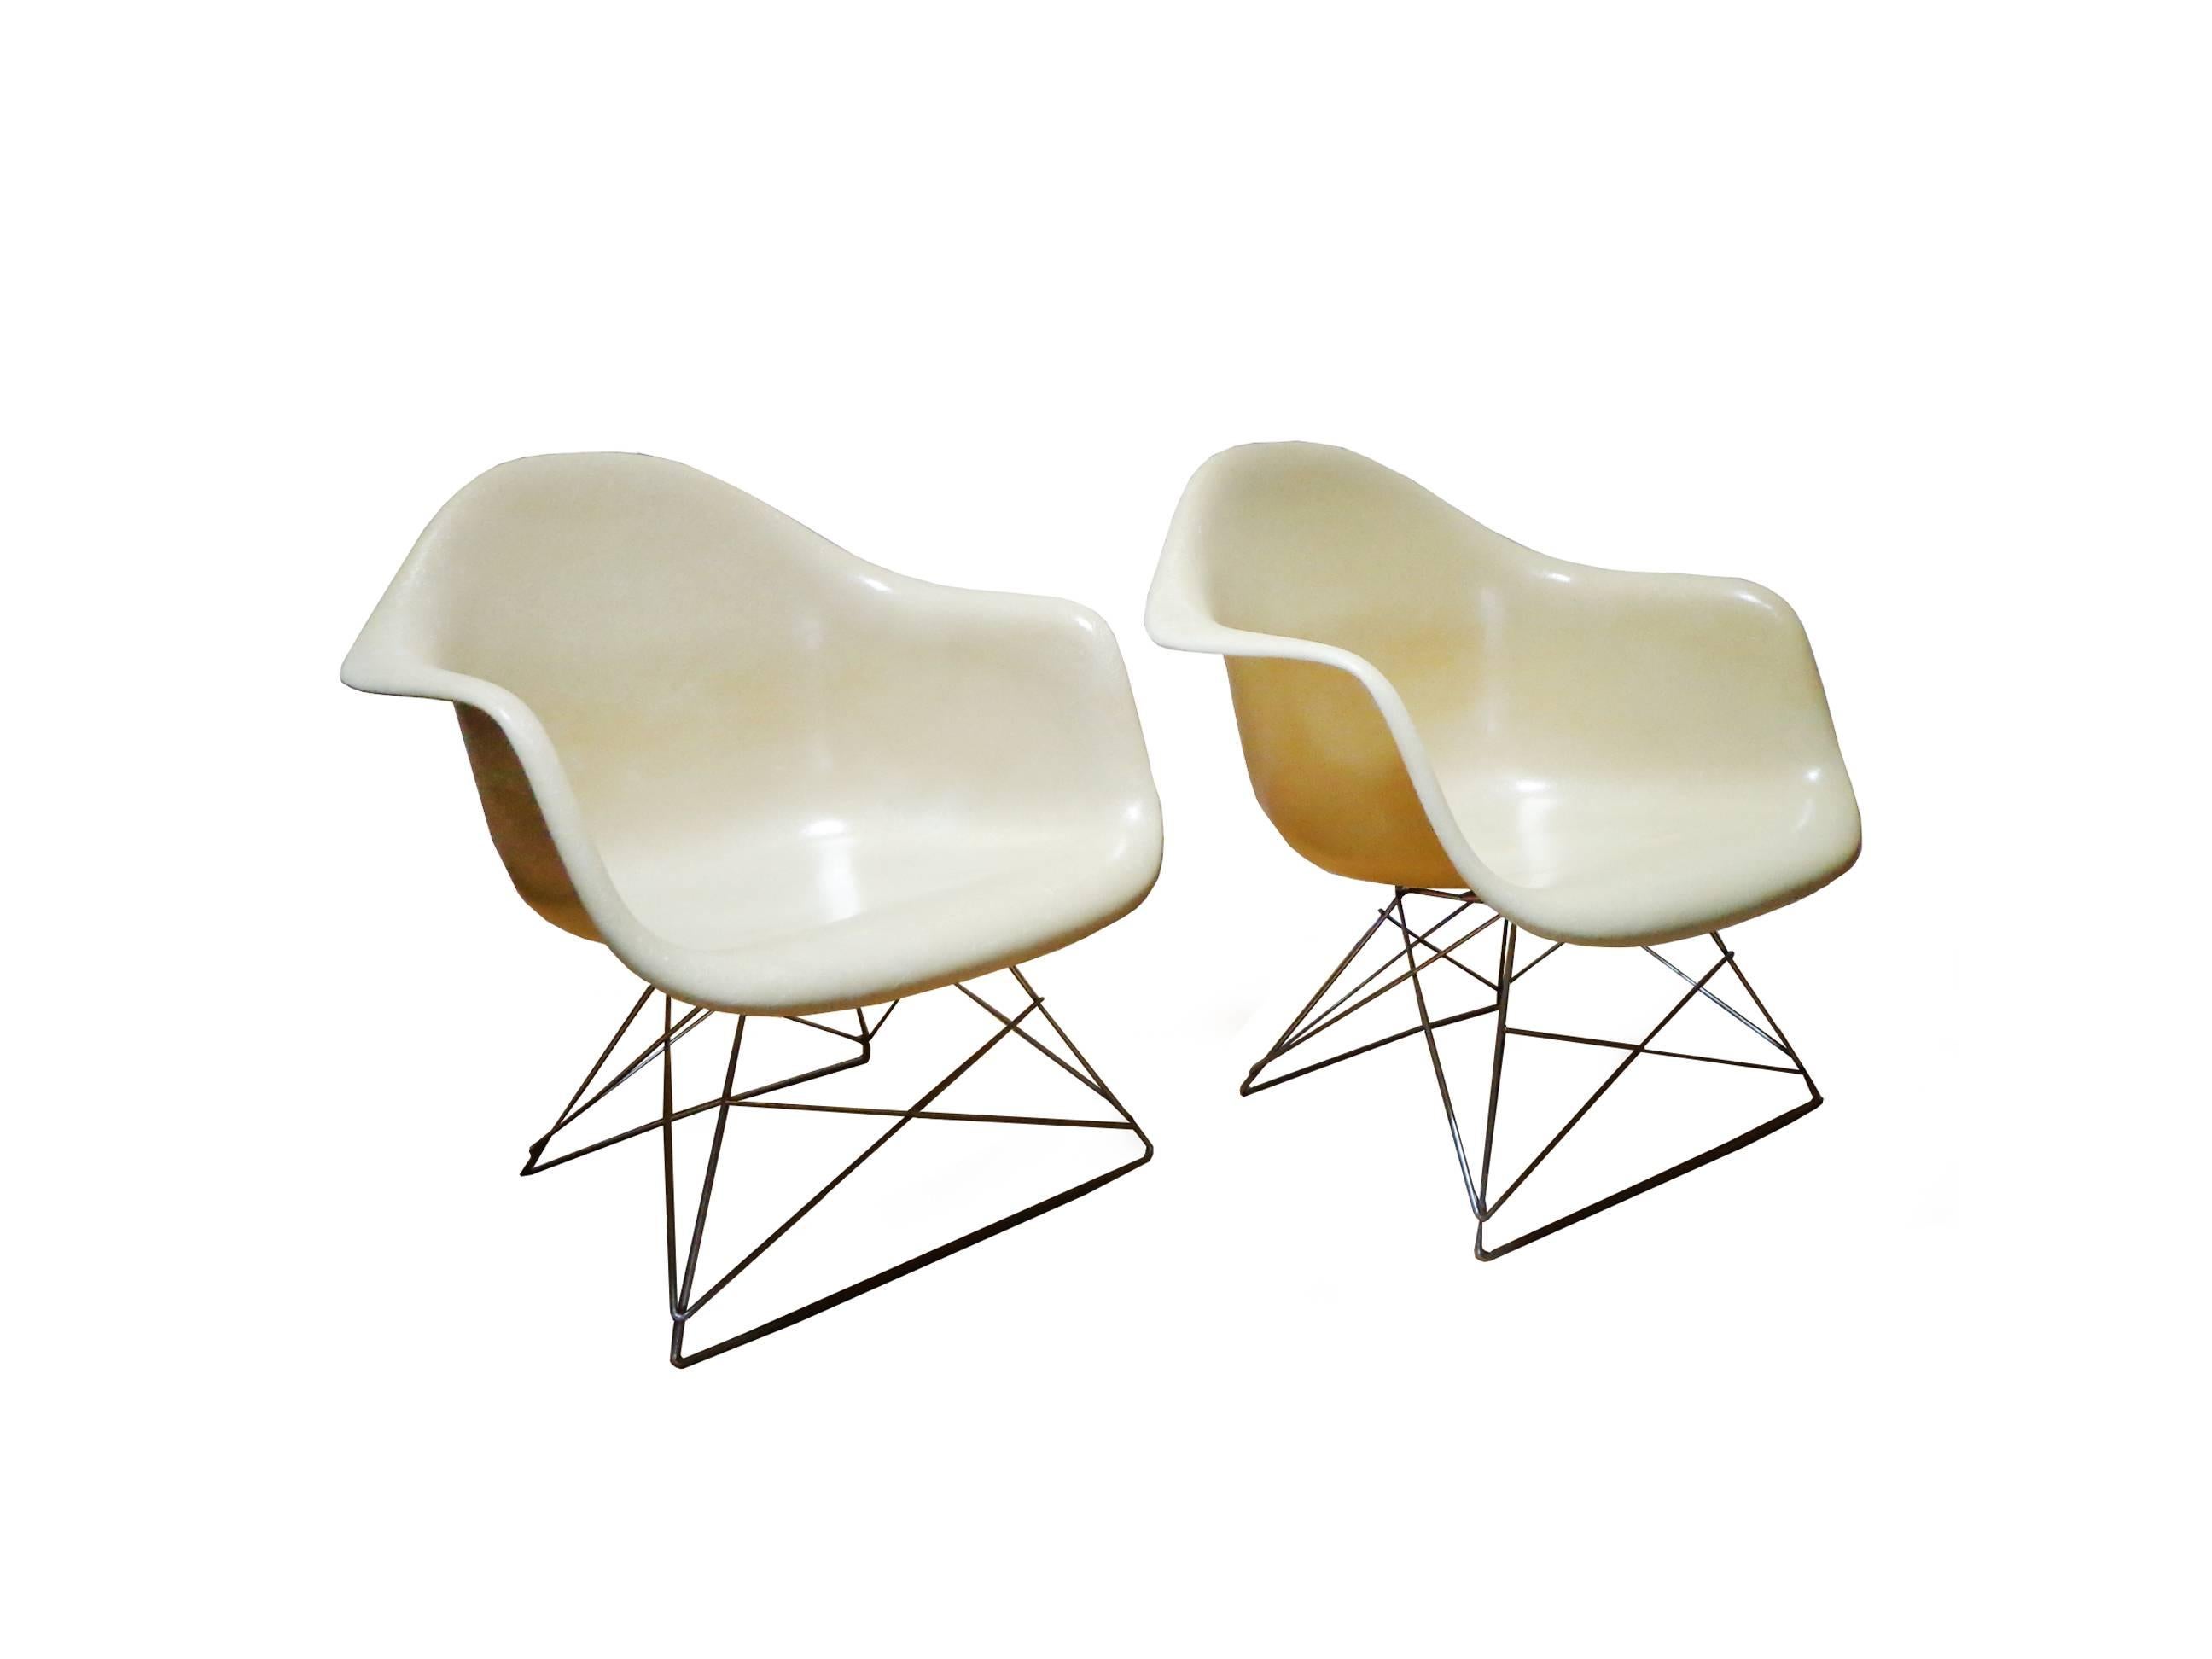 Offerd by Zitzo, Amsterdam: Charles and Ray Eames Low armchair rod (LAR) for Herman Miller. Molded off-white fiberglass, chrome-plated steel, rubber. One item is sold!

Signed with manufacturer's mark to rubber underside.

literature: Eames Design: